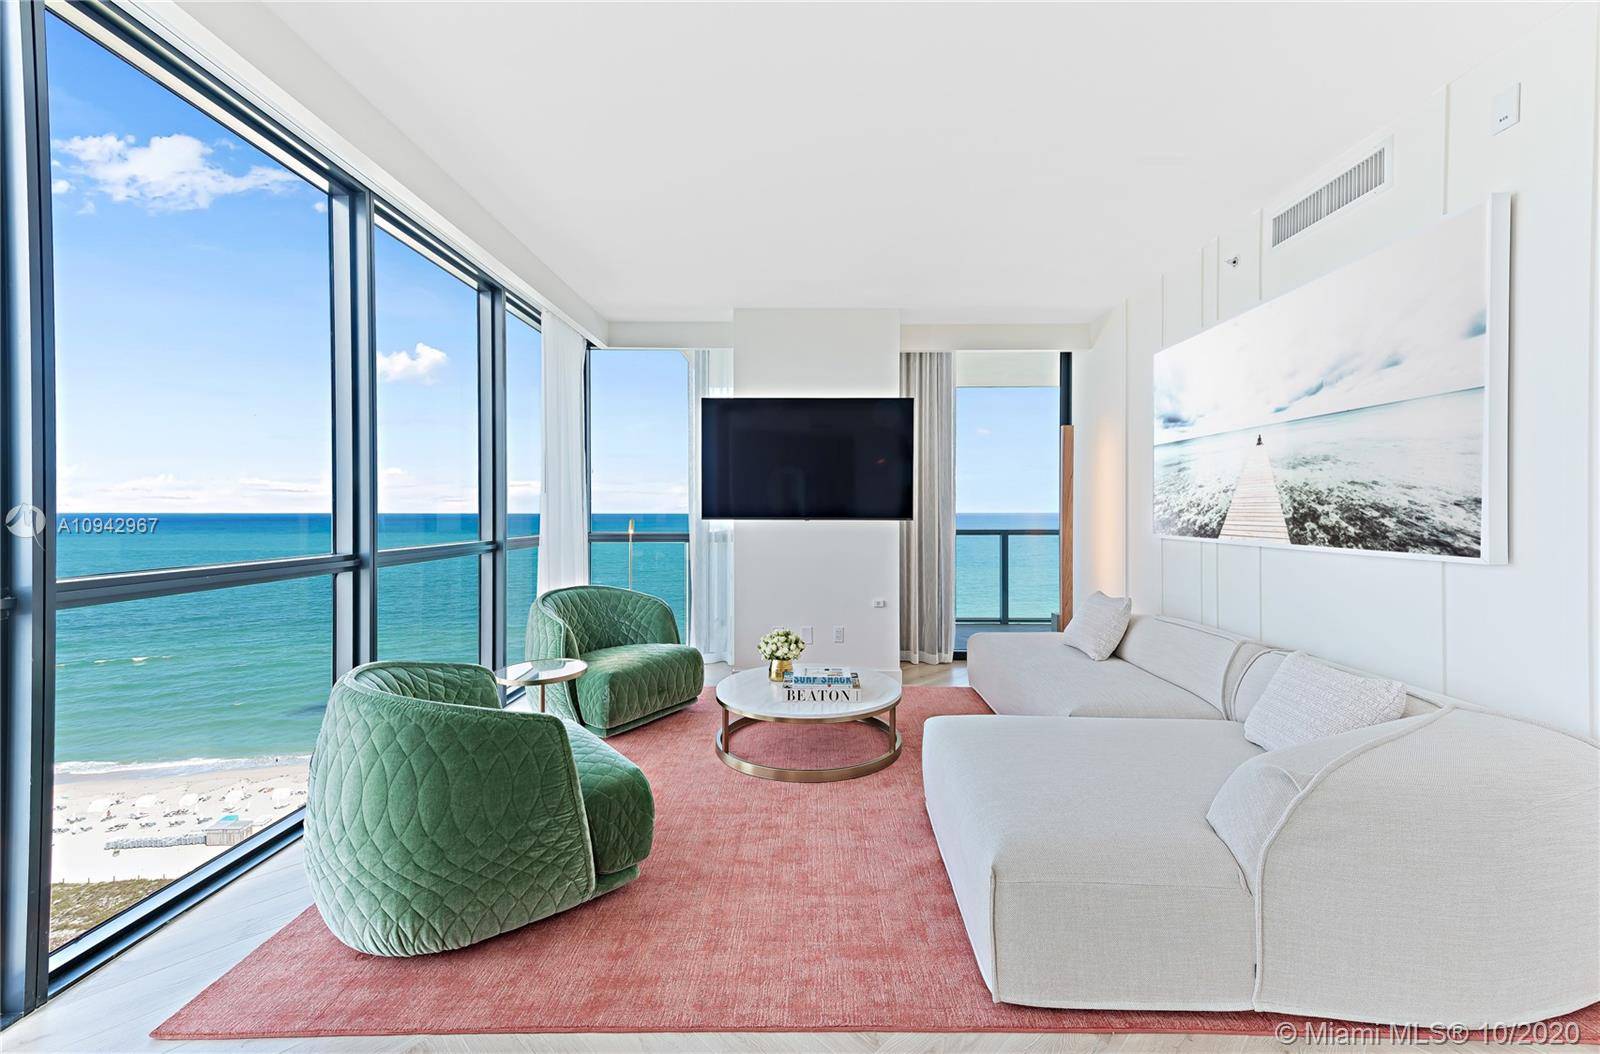 Following a 30 Million renovation, we are proud to unveil the new rental residences at the iconic W South Beach.